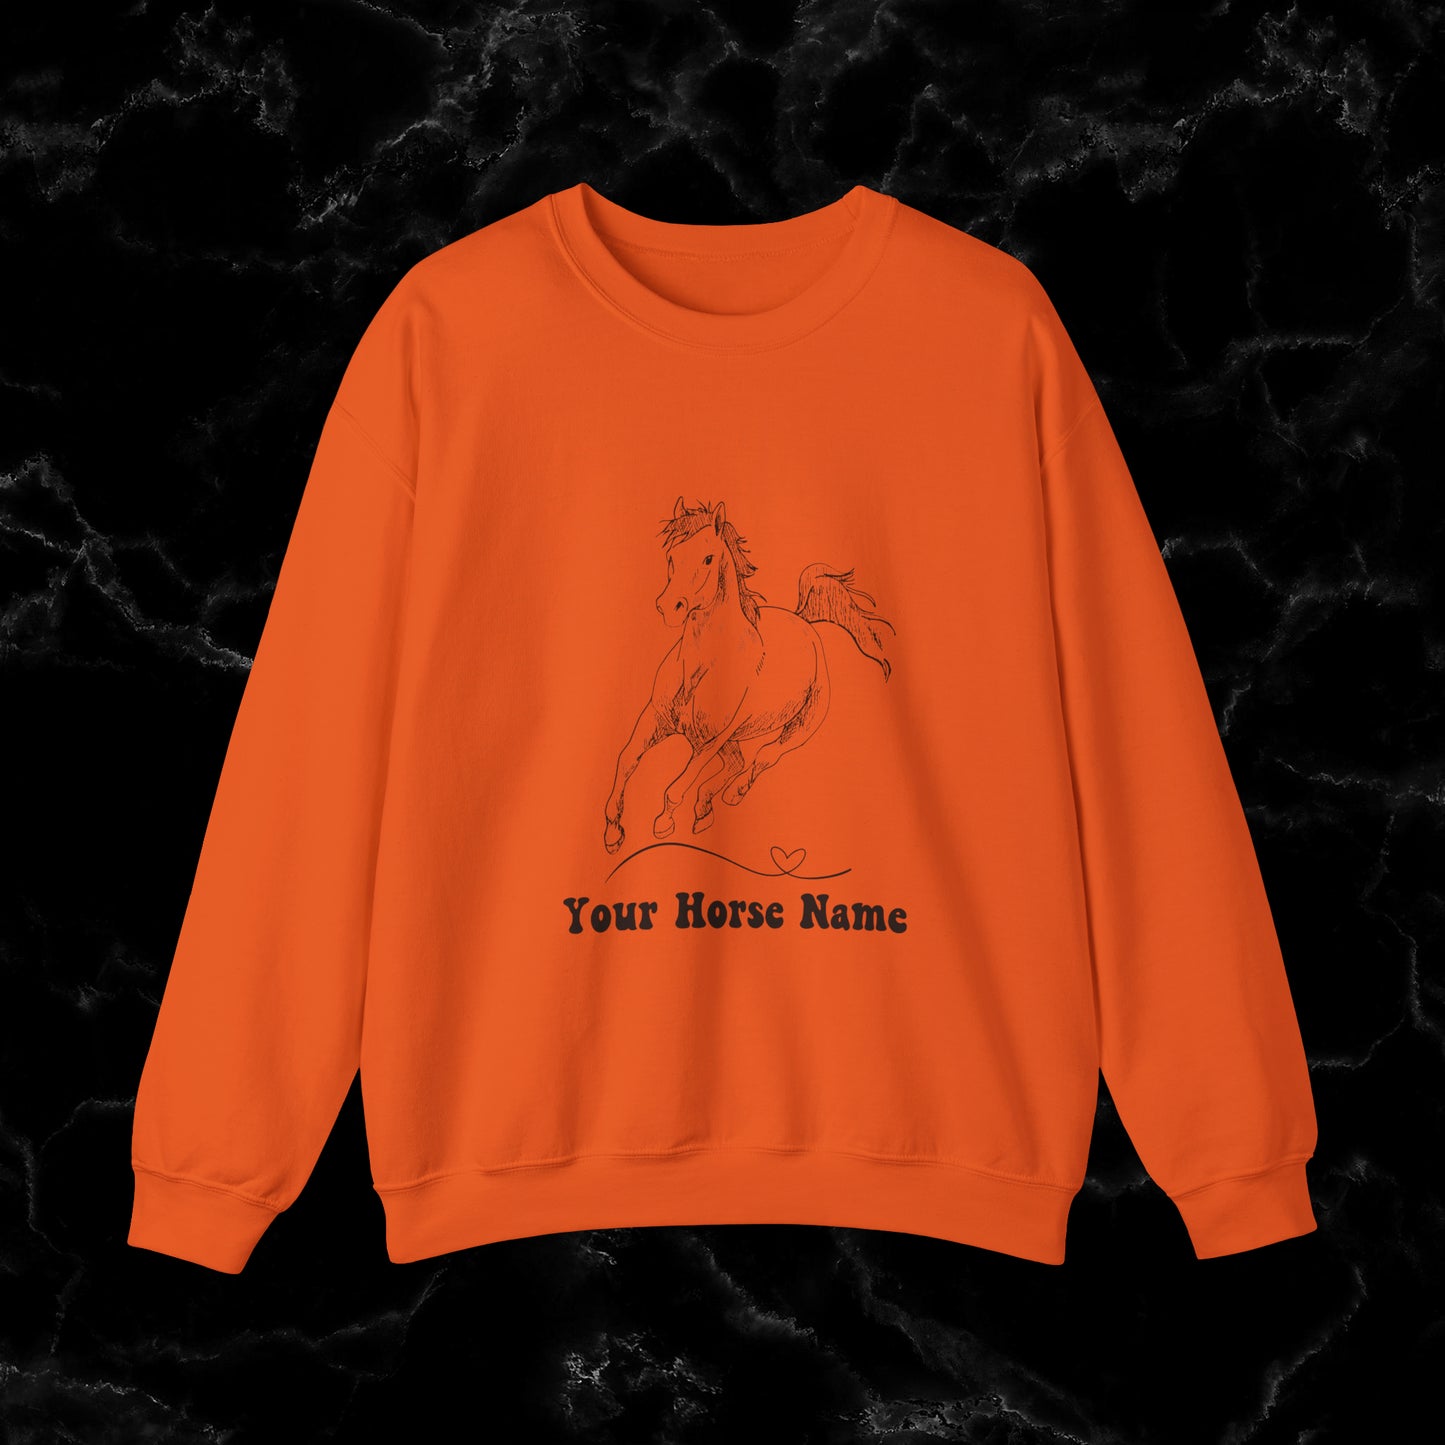 Personalized Horse Sweatshirt - Gift for Horse Owner, Perfect for Christmas, Birthdays, and Equestrian Enthusiasts - Wrap Up Warmth and Personal Connection with this Thoughtful Horse Lover's Gift Sweatshirt S Orange 